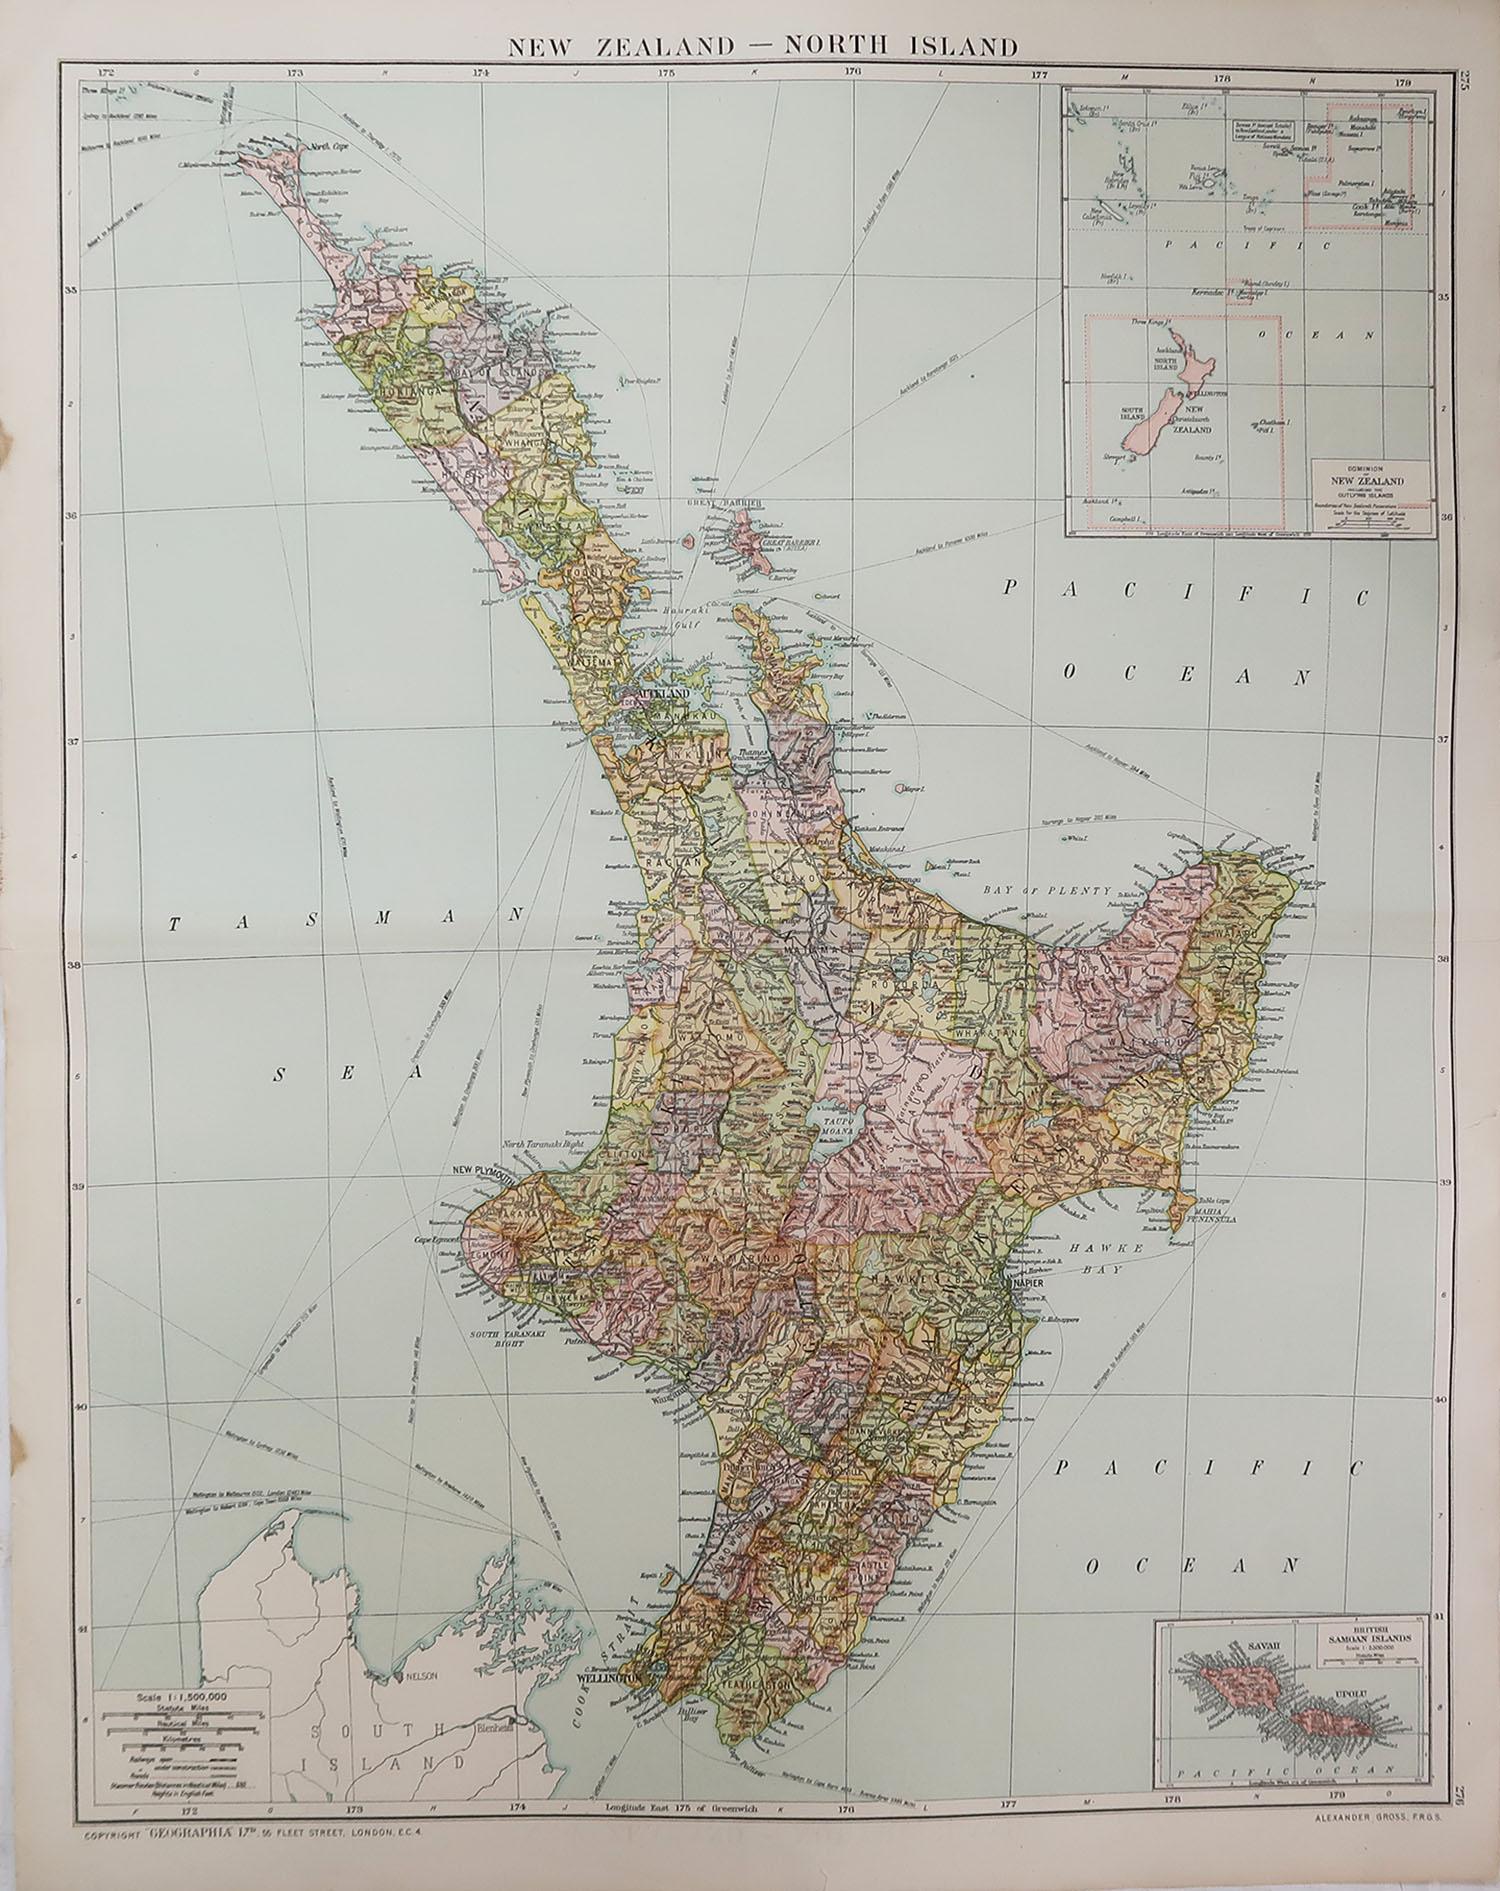 Great map of North Island, New Zealand

Original color. 

Good condition 

Published by Alexander Gross

Unframed.








